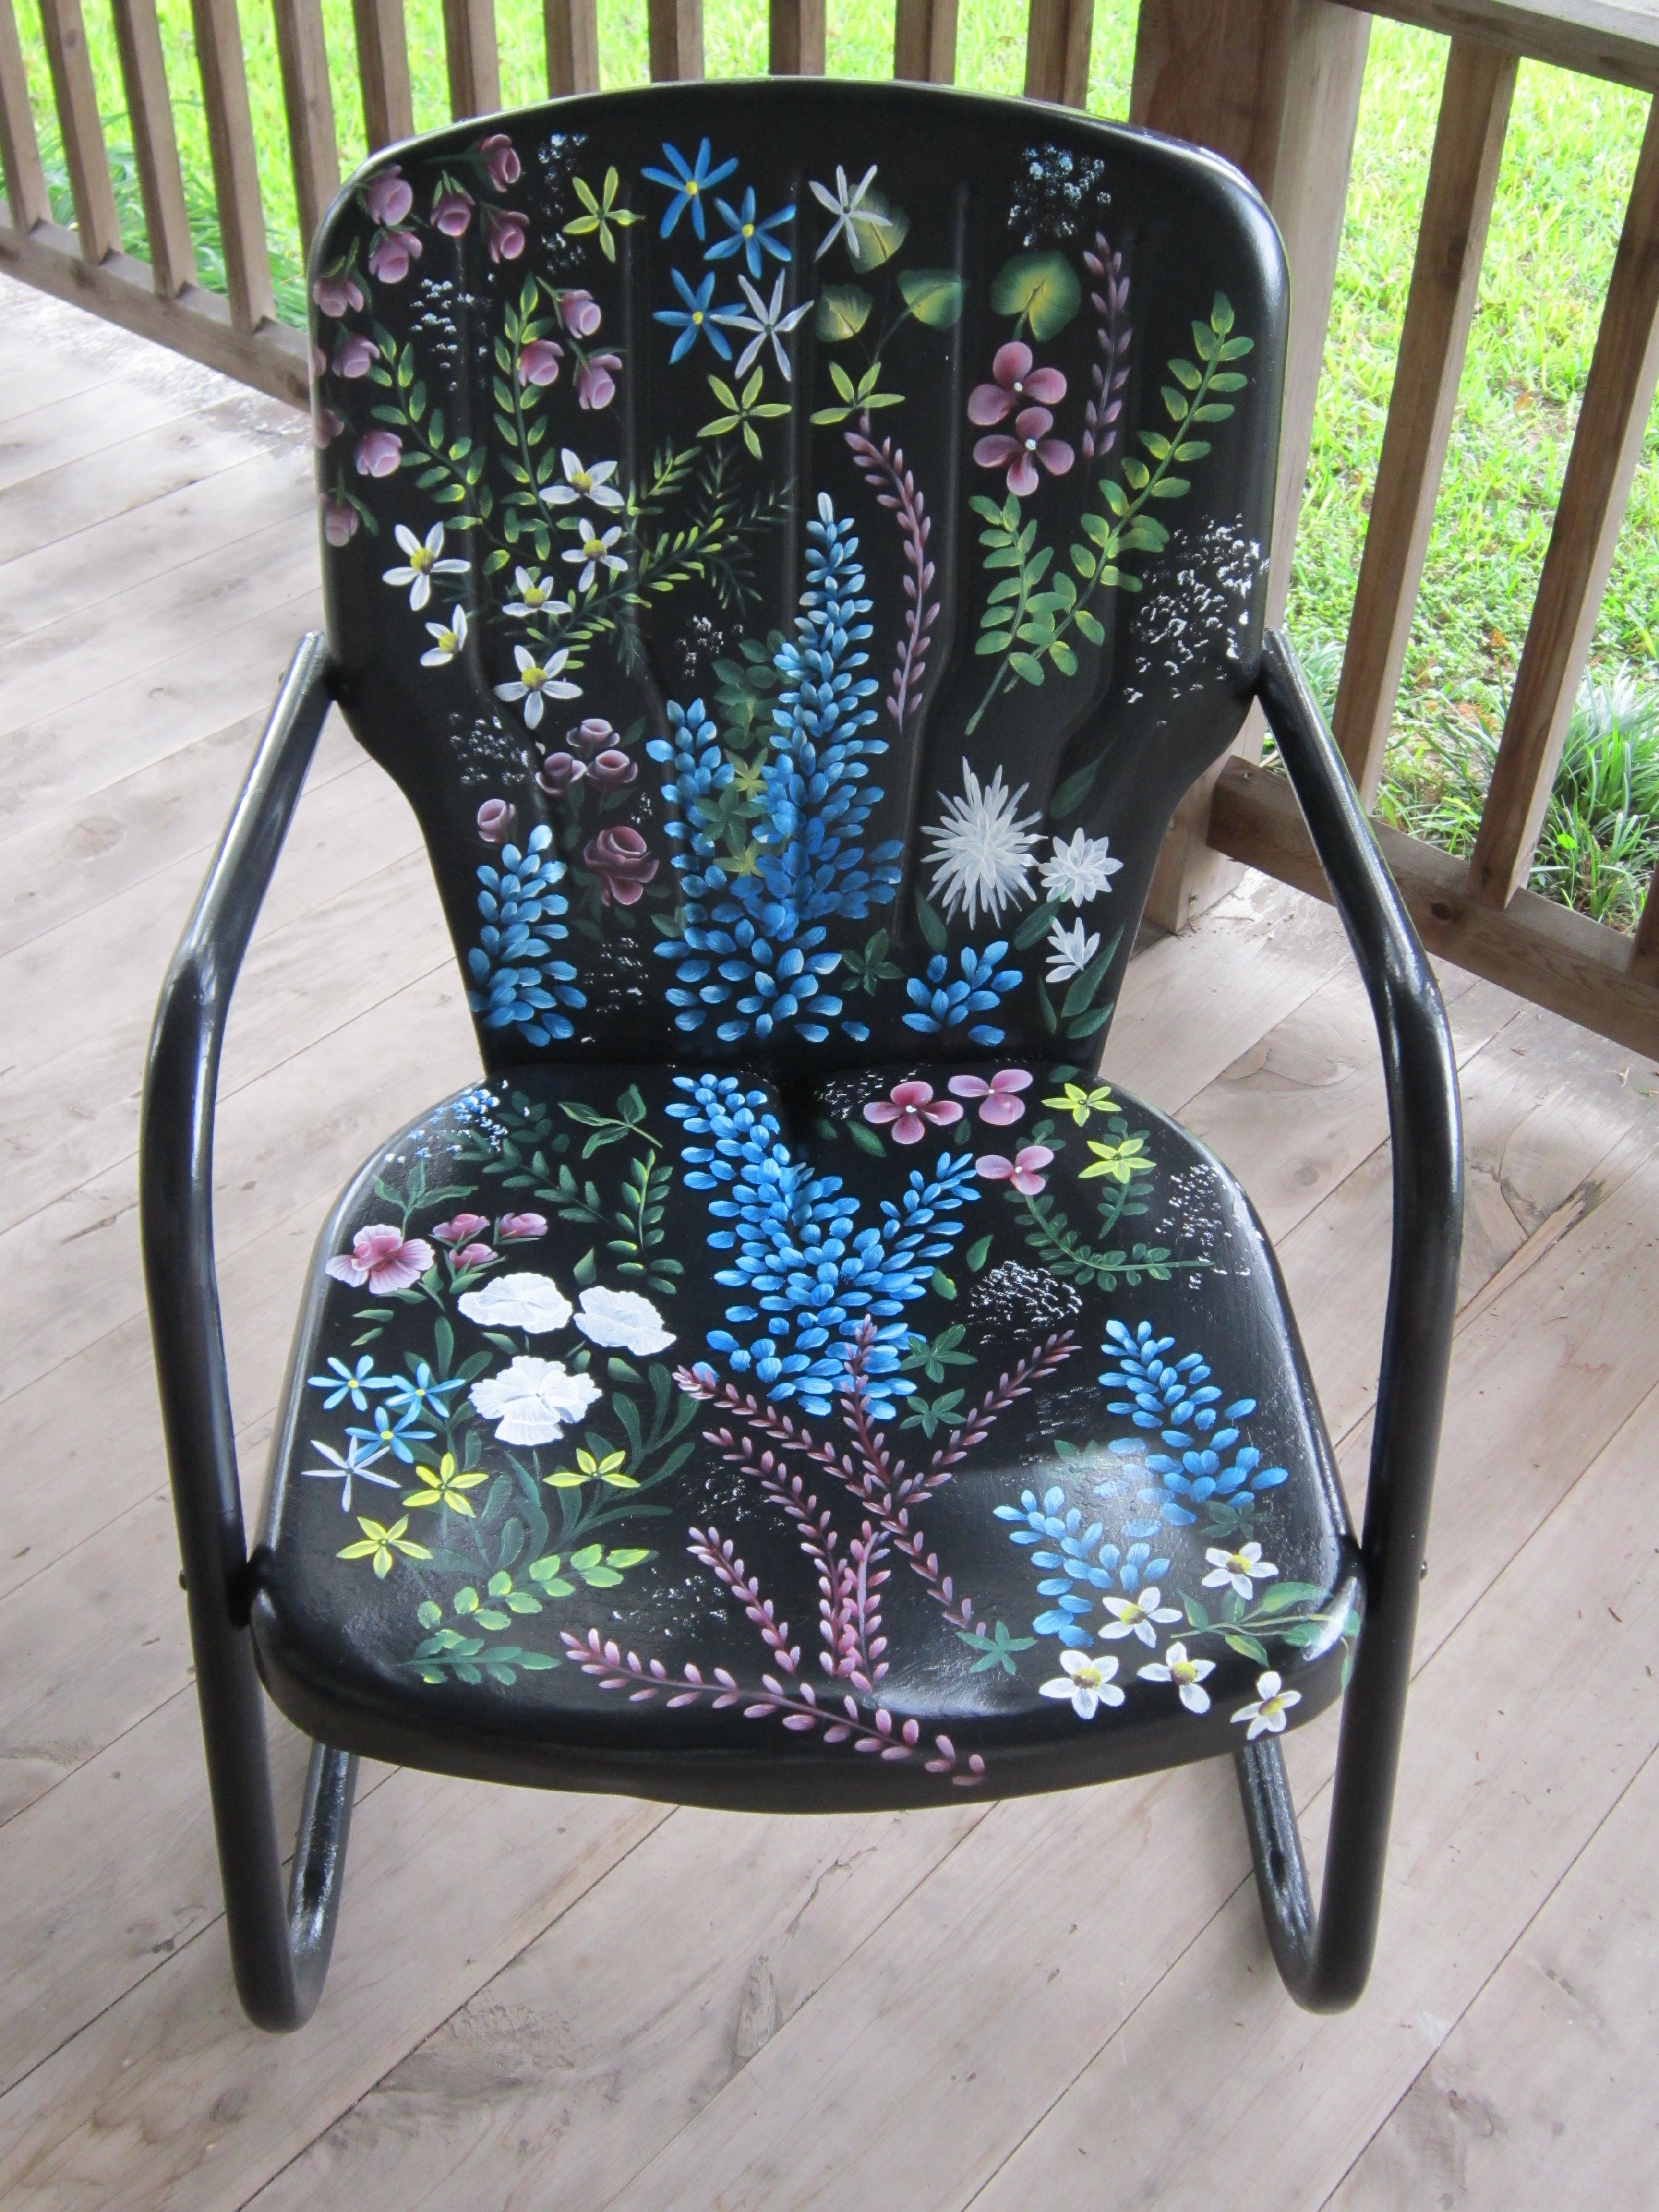 Vintage Collectible S Metal Lawn Chair